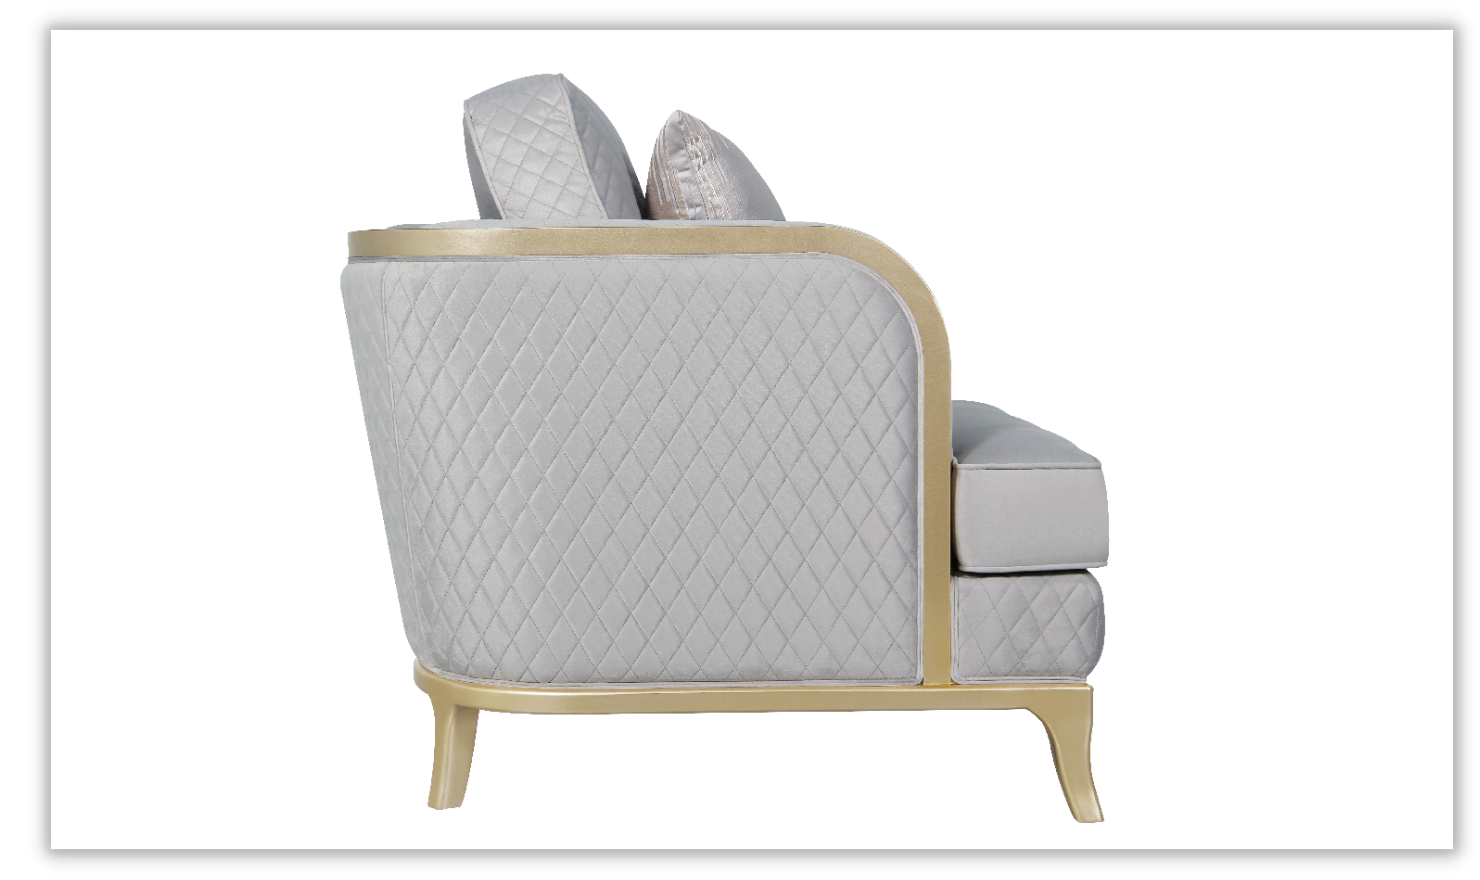 Adele Beige Chair with Accent Pillow